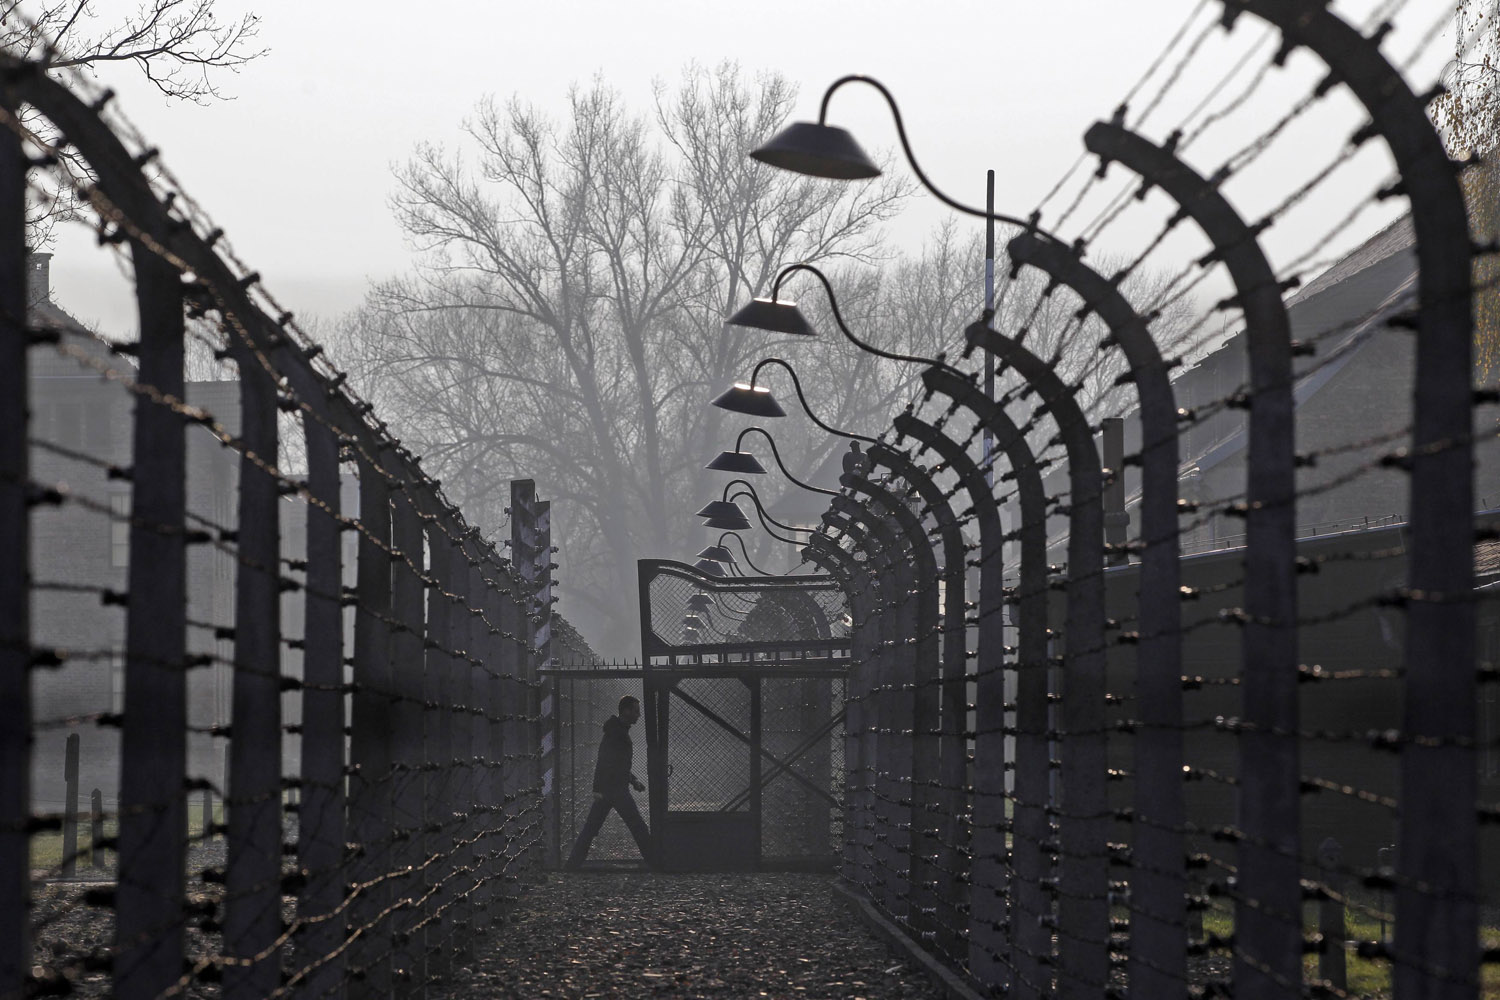 Nov. 18, 2013. A visitor walks between electric barbed-wired fences at the Auschwitz-Birkenau memorial and former concentration camp in Poland.